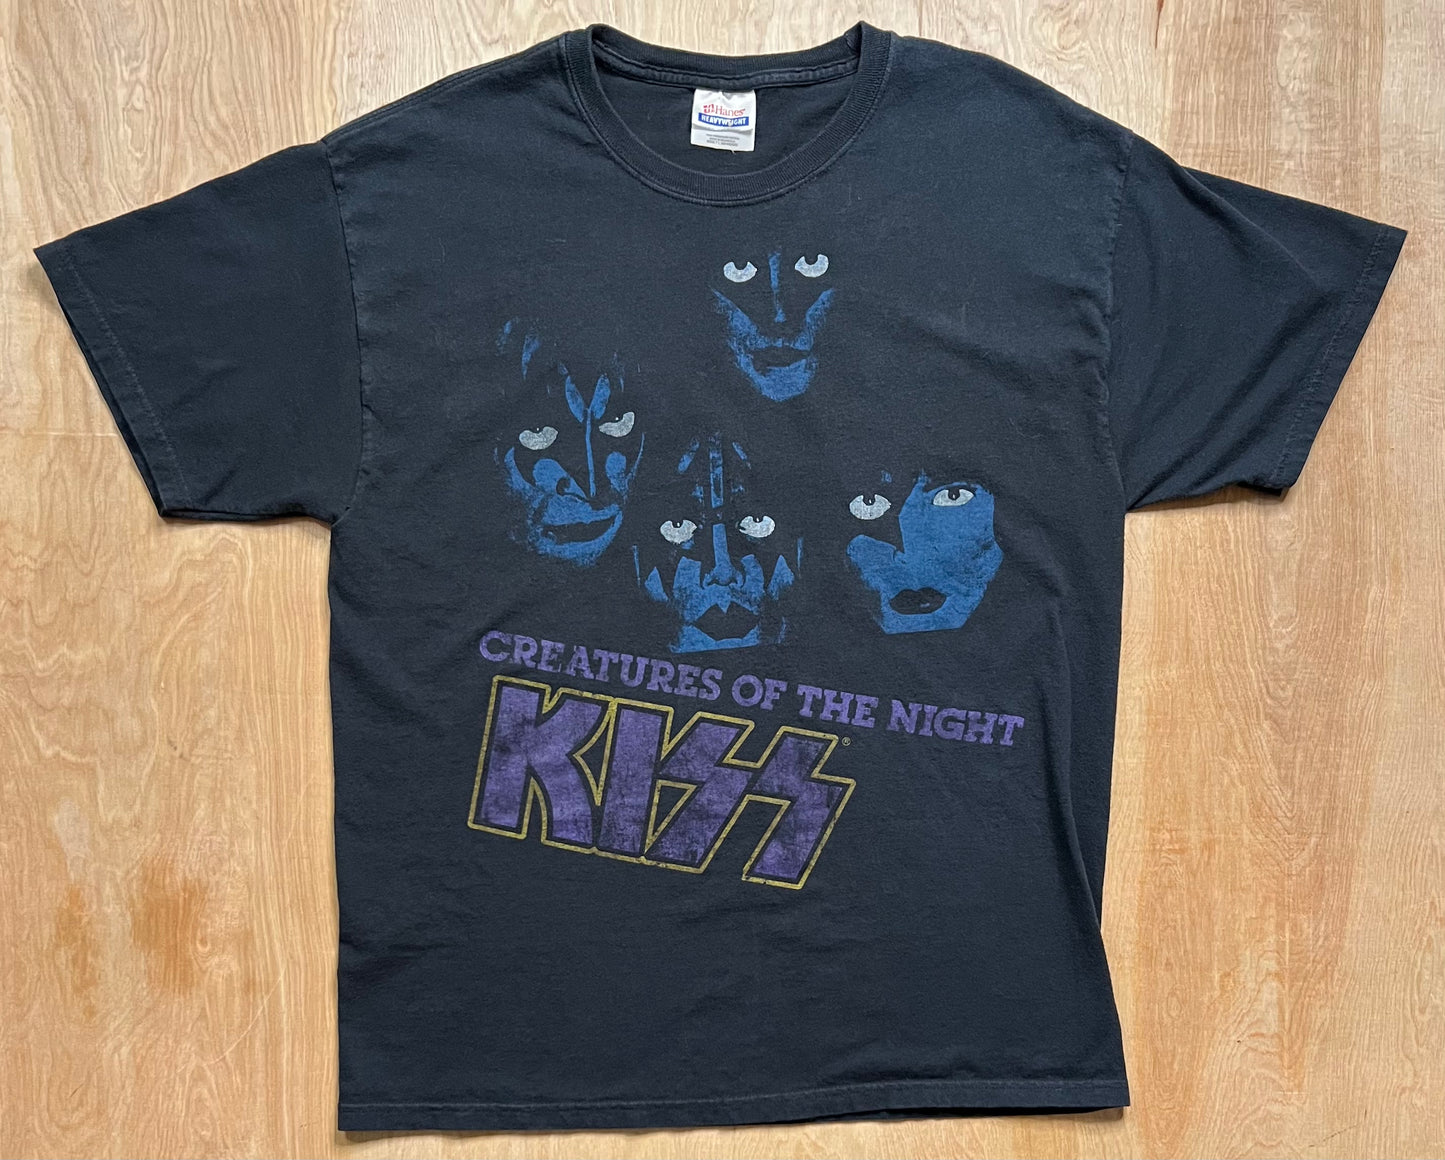 2007 Kiss "1983 Creatures of the Night" T-Shirt